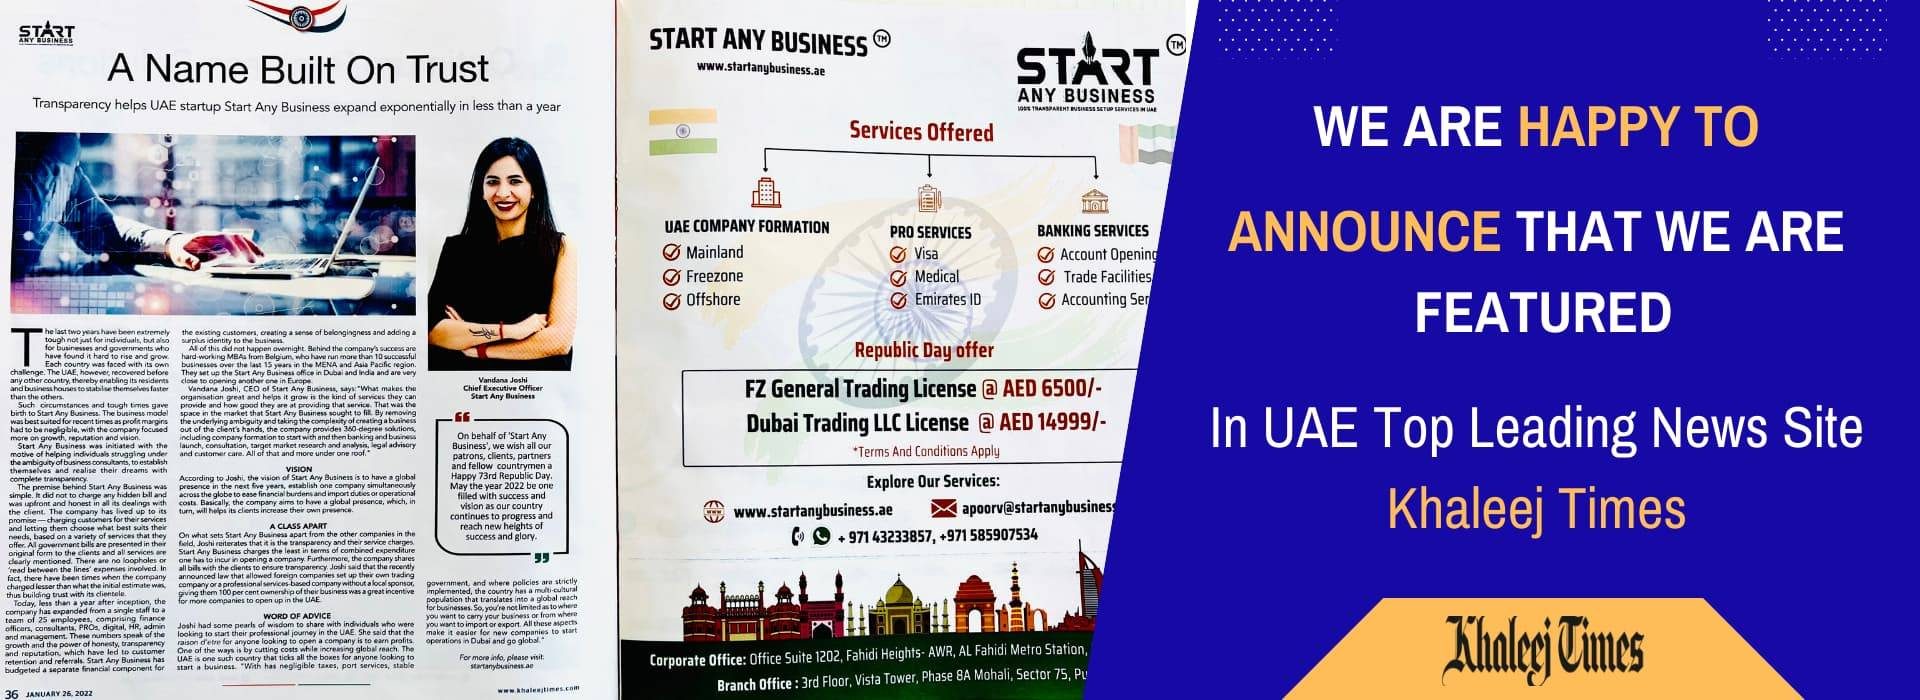 Start Any Business Featured in Khaleej Times